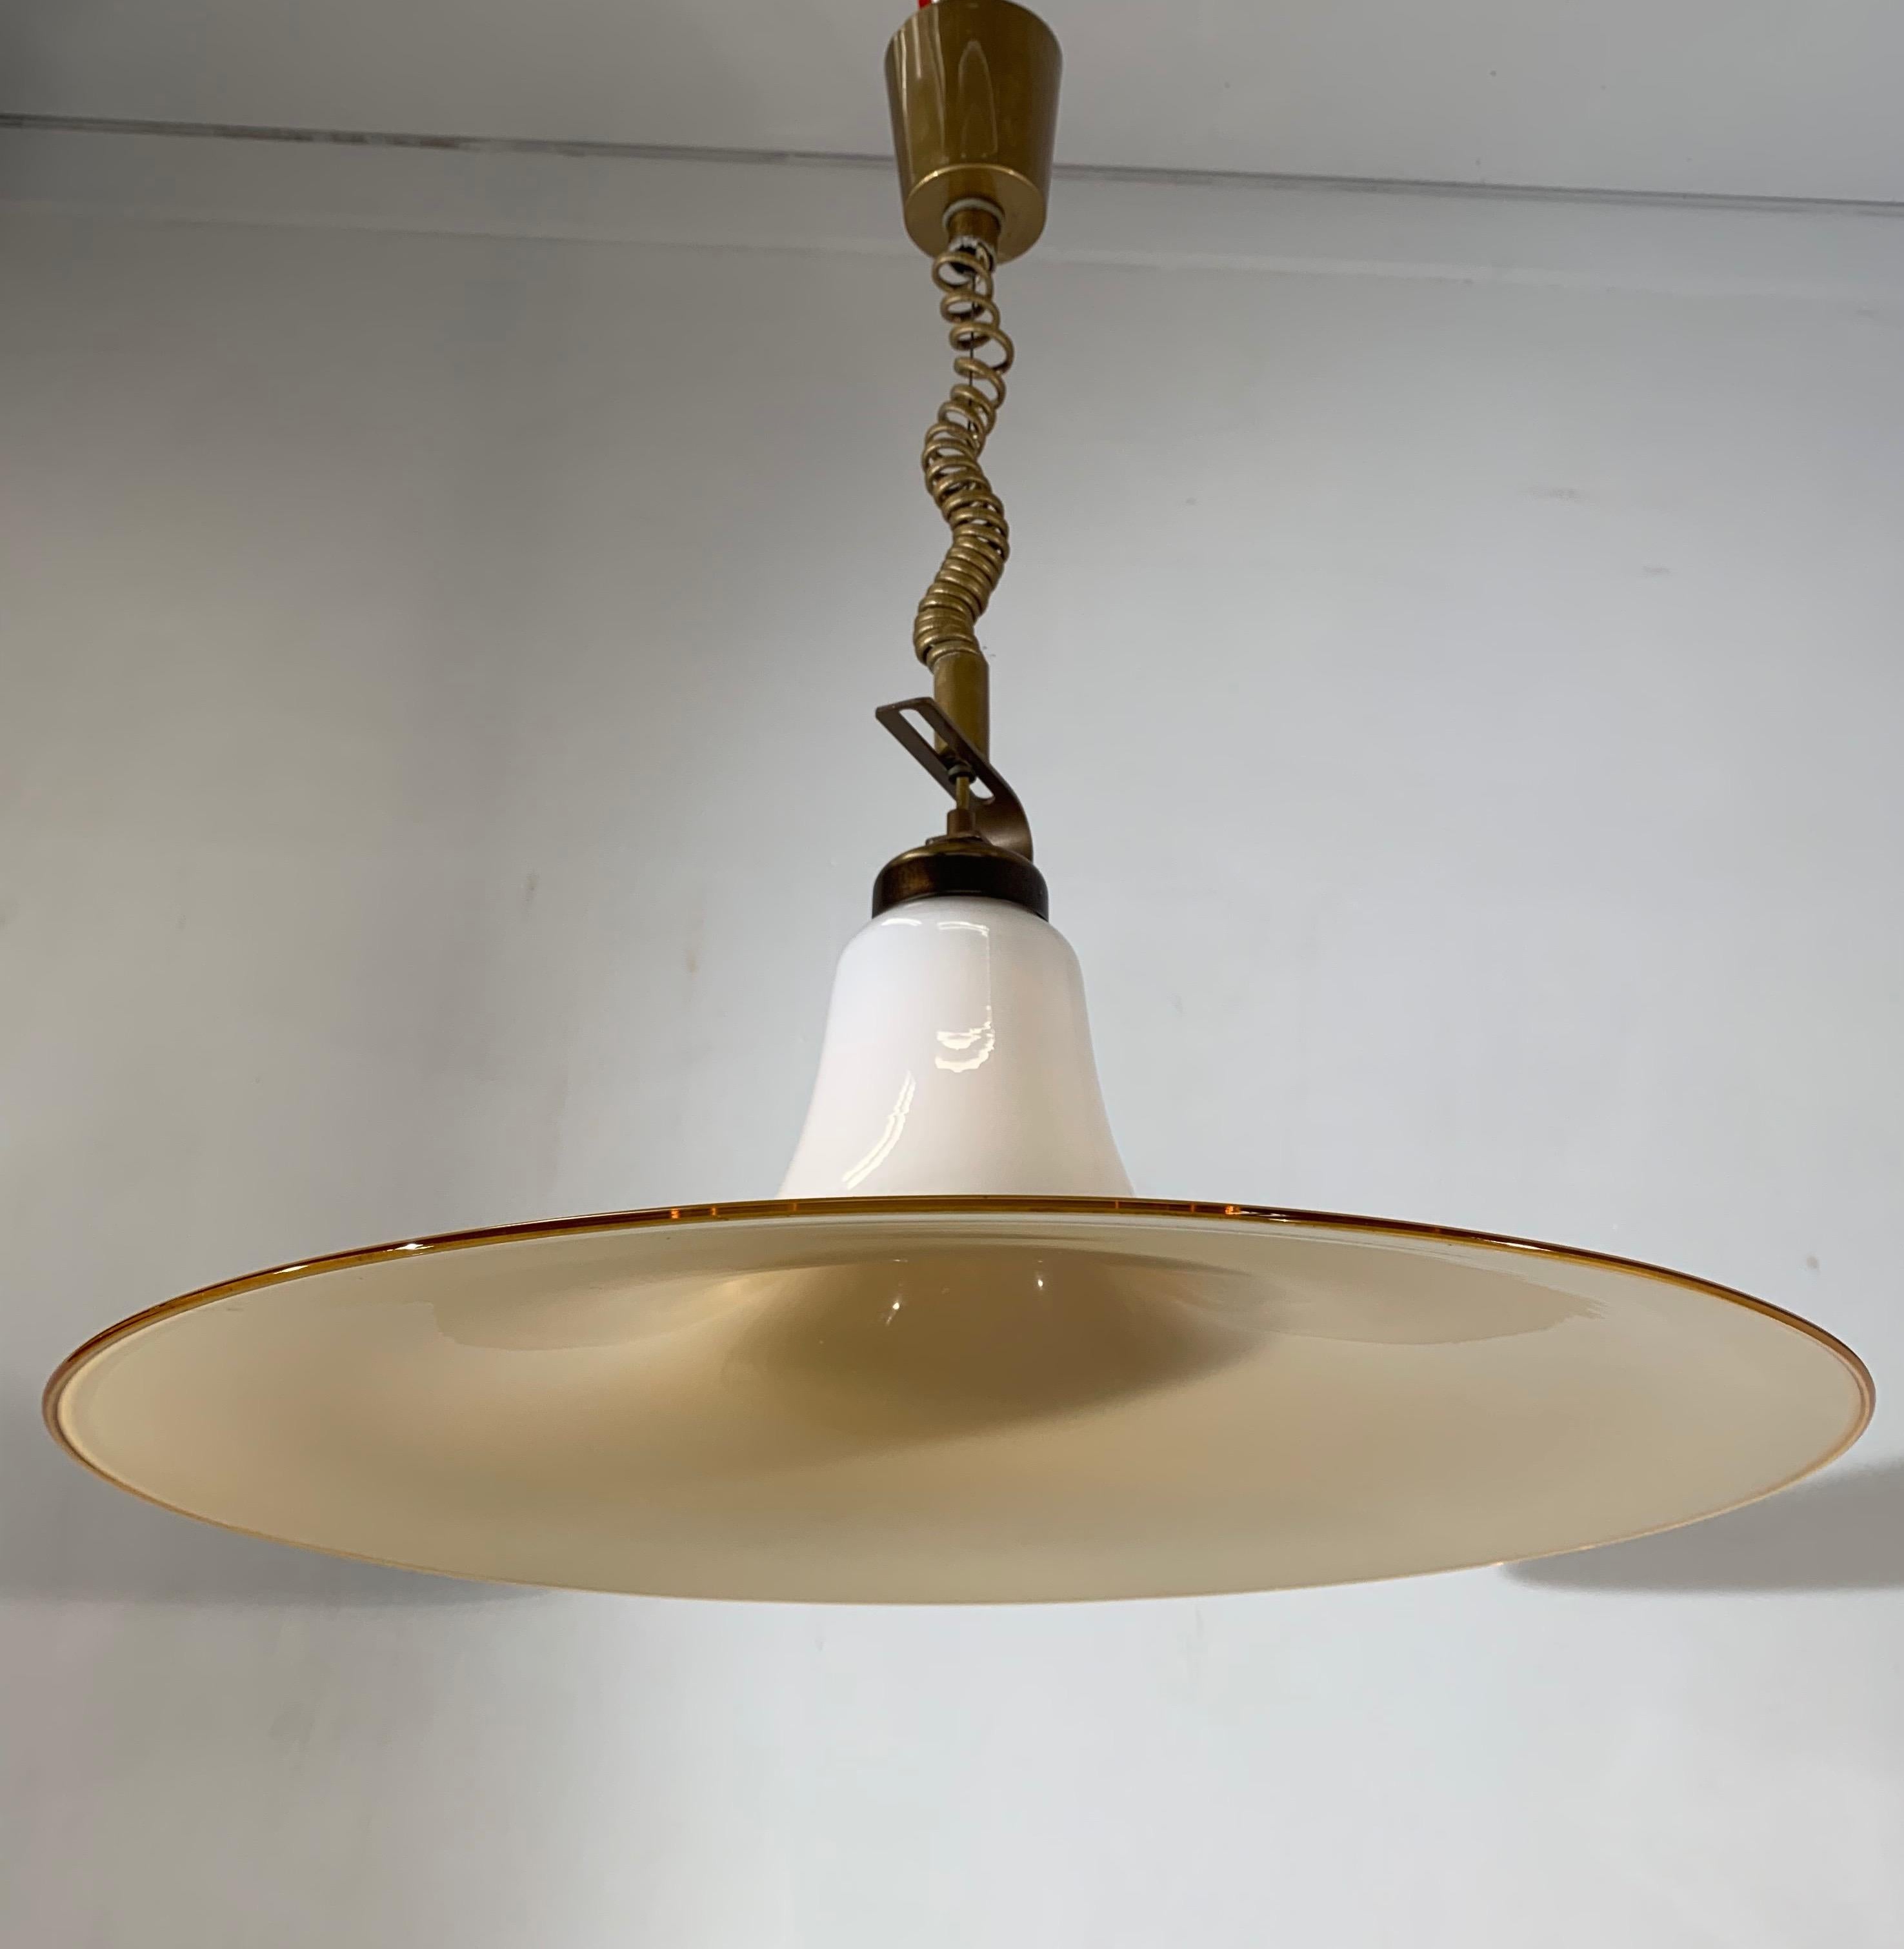 Wonderful midcentury chandelier.

If you are looking for a rare and stylish mid-20th century fixture to grace your home then this handcrafted Italian light could be perfect. One person might see an upside down vortex of liquid glass in this shade,